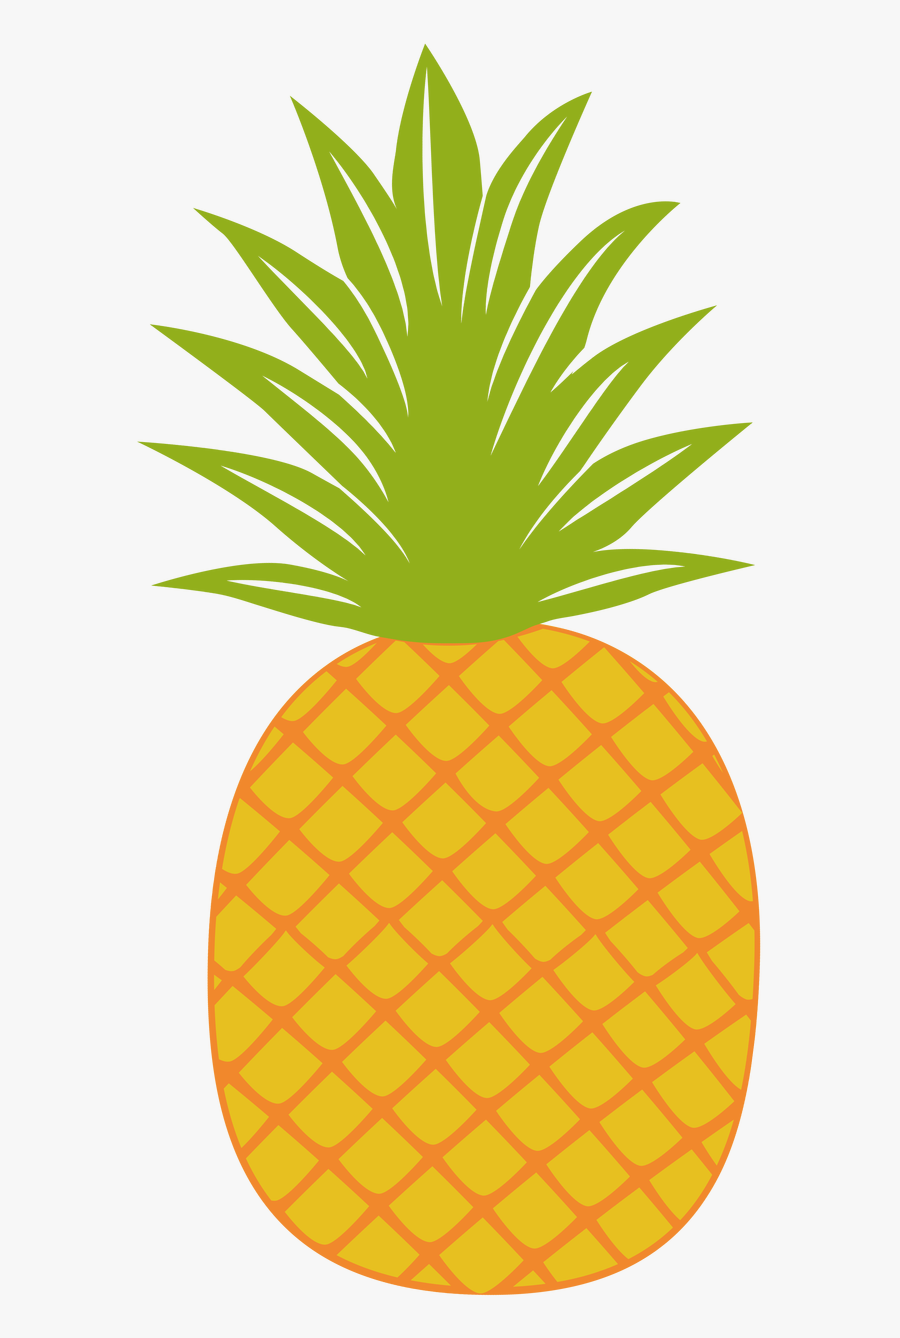 Download Pineapple Clipart Fancy Cut File Pineapple Svg Free Transparent Clipart Clipartkey SVG, PNG, EPS, DXF File